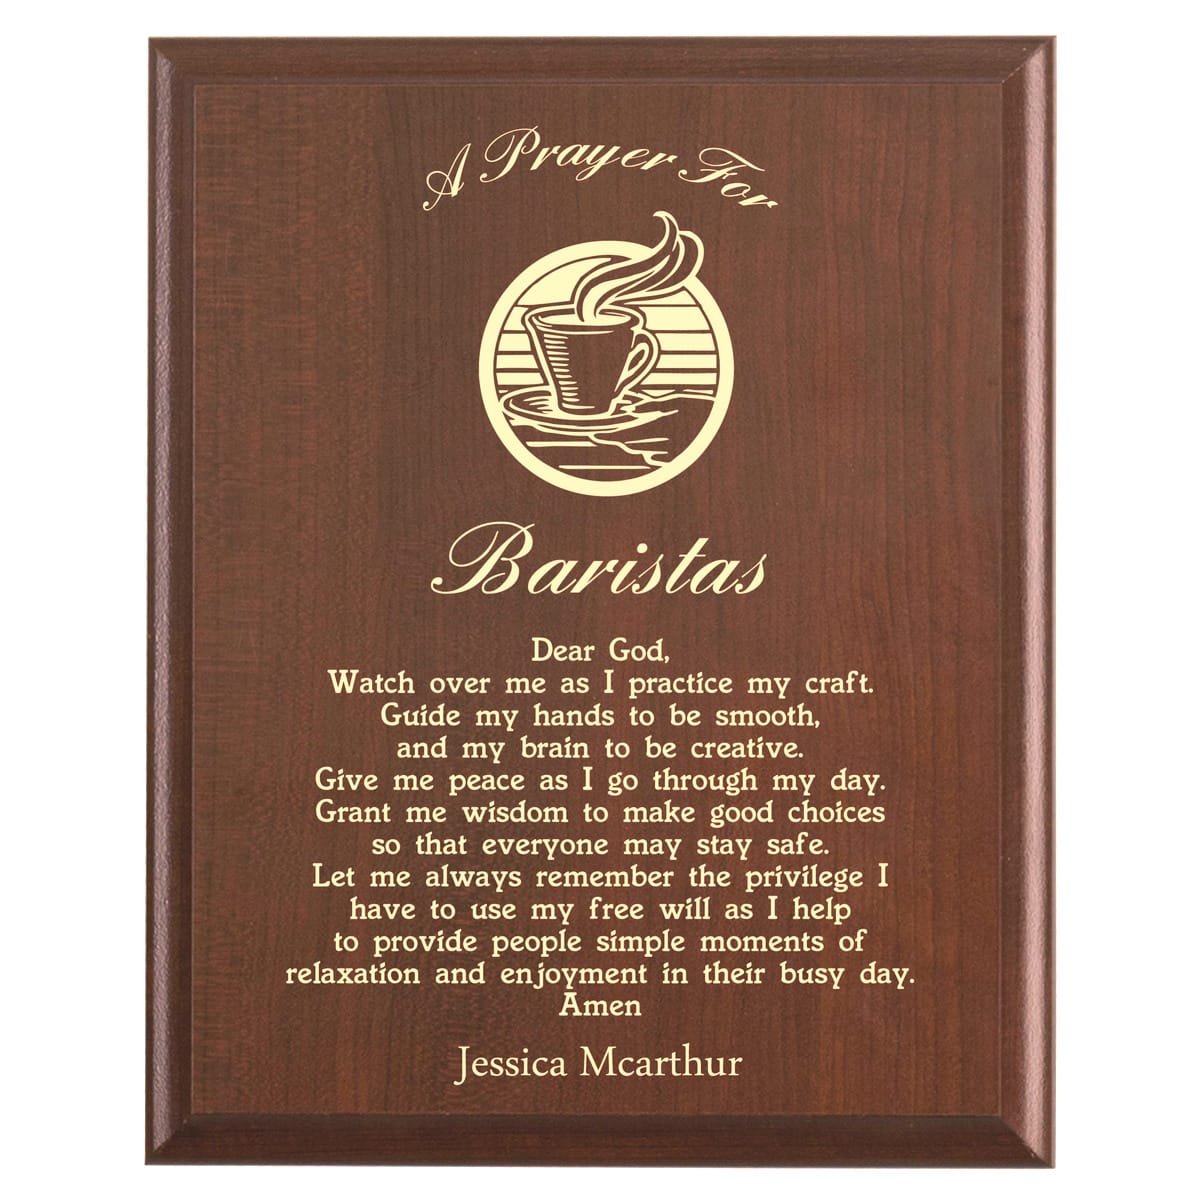 Plaque photo: Baristas Prayer Plaque design with free personalization. Wood style finish with customized text.